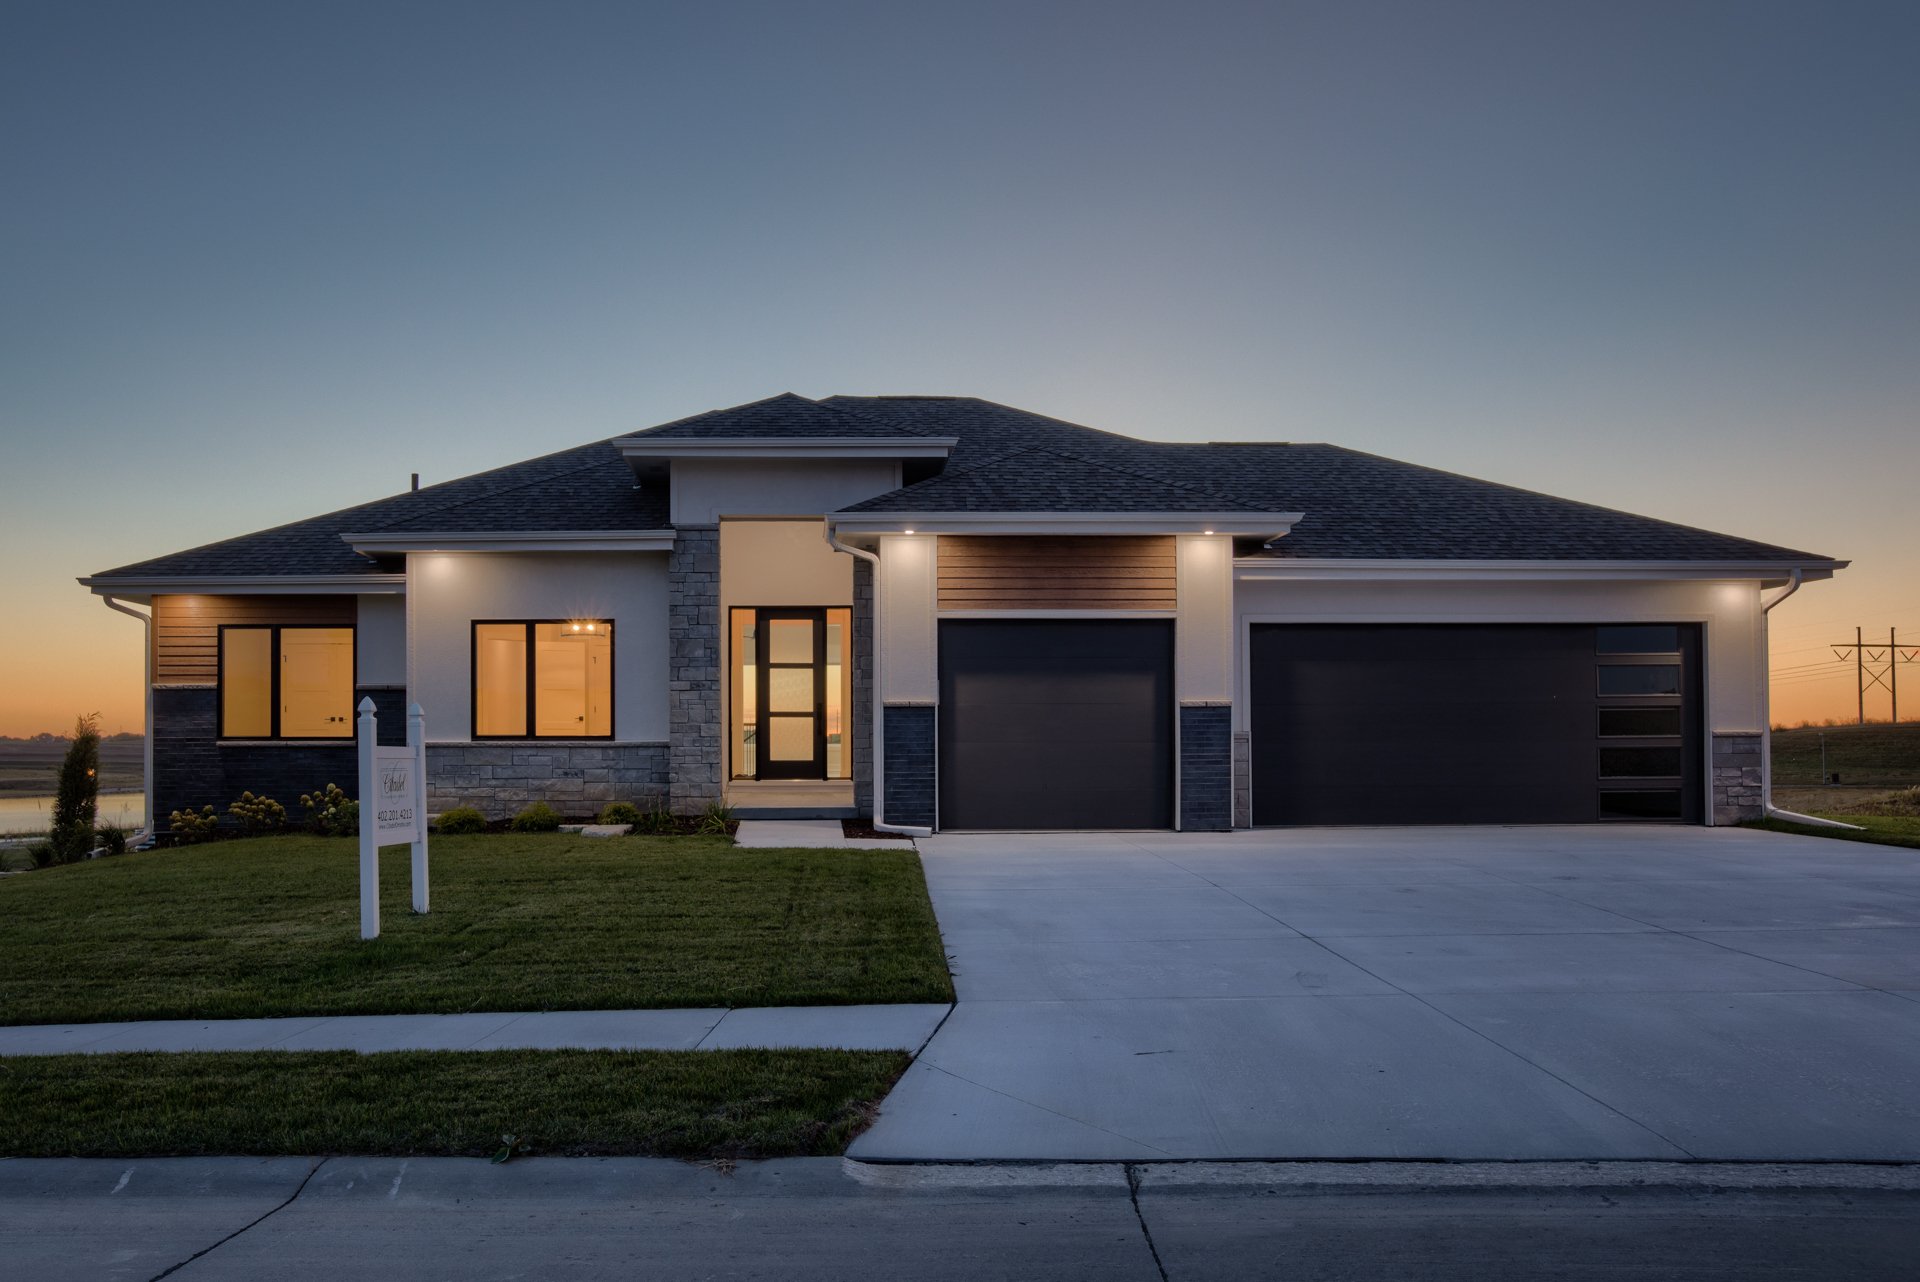 front curb view of a ranch style home at dusk designed by citadel signature homes in omaha, nebraska